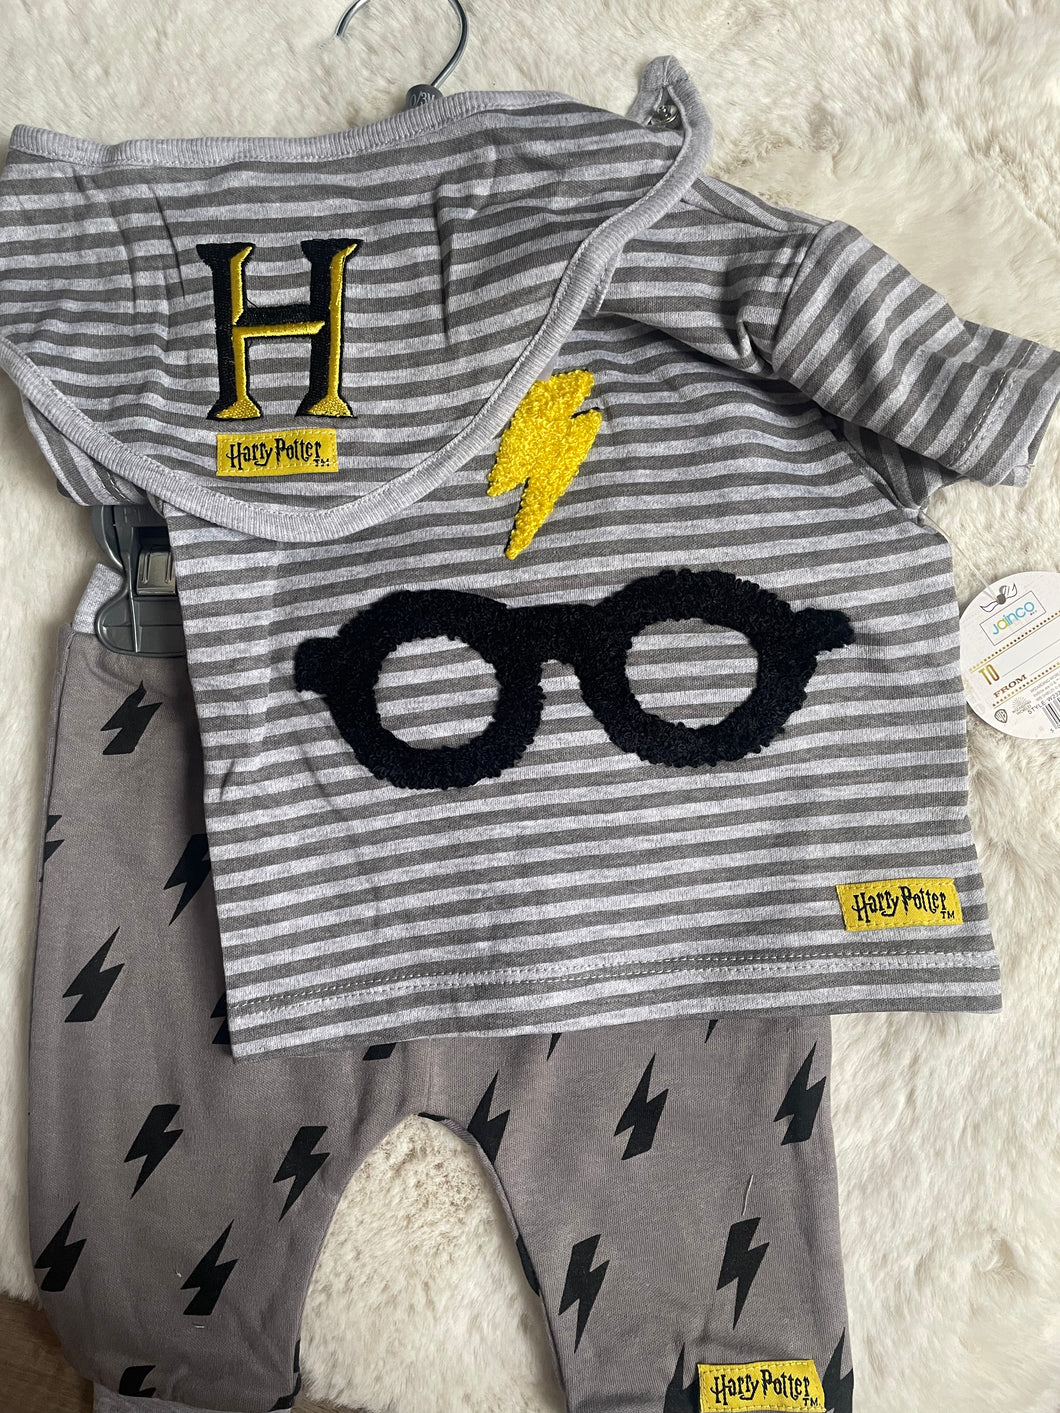 Harry Potter outfit